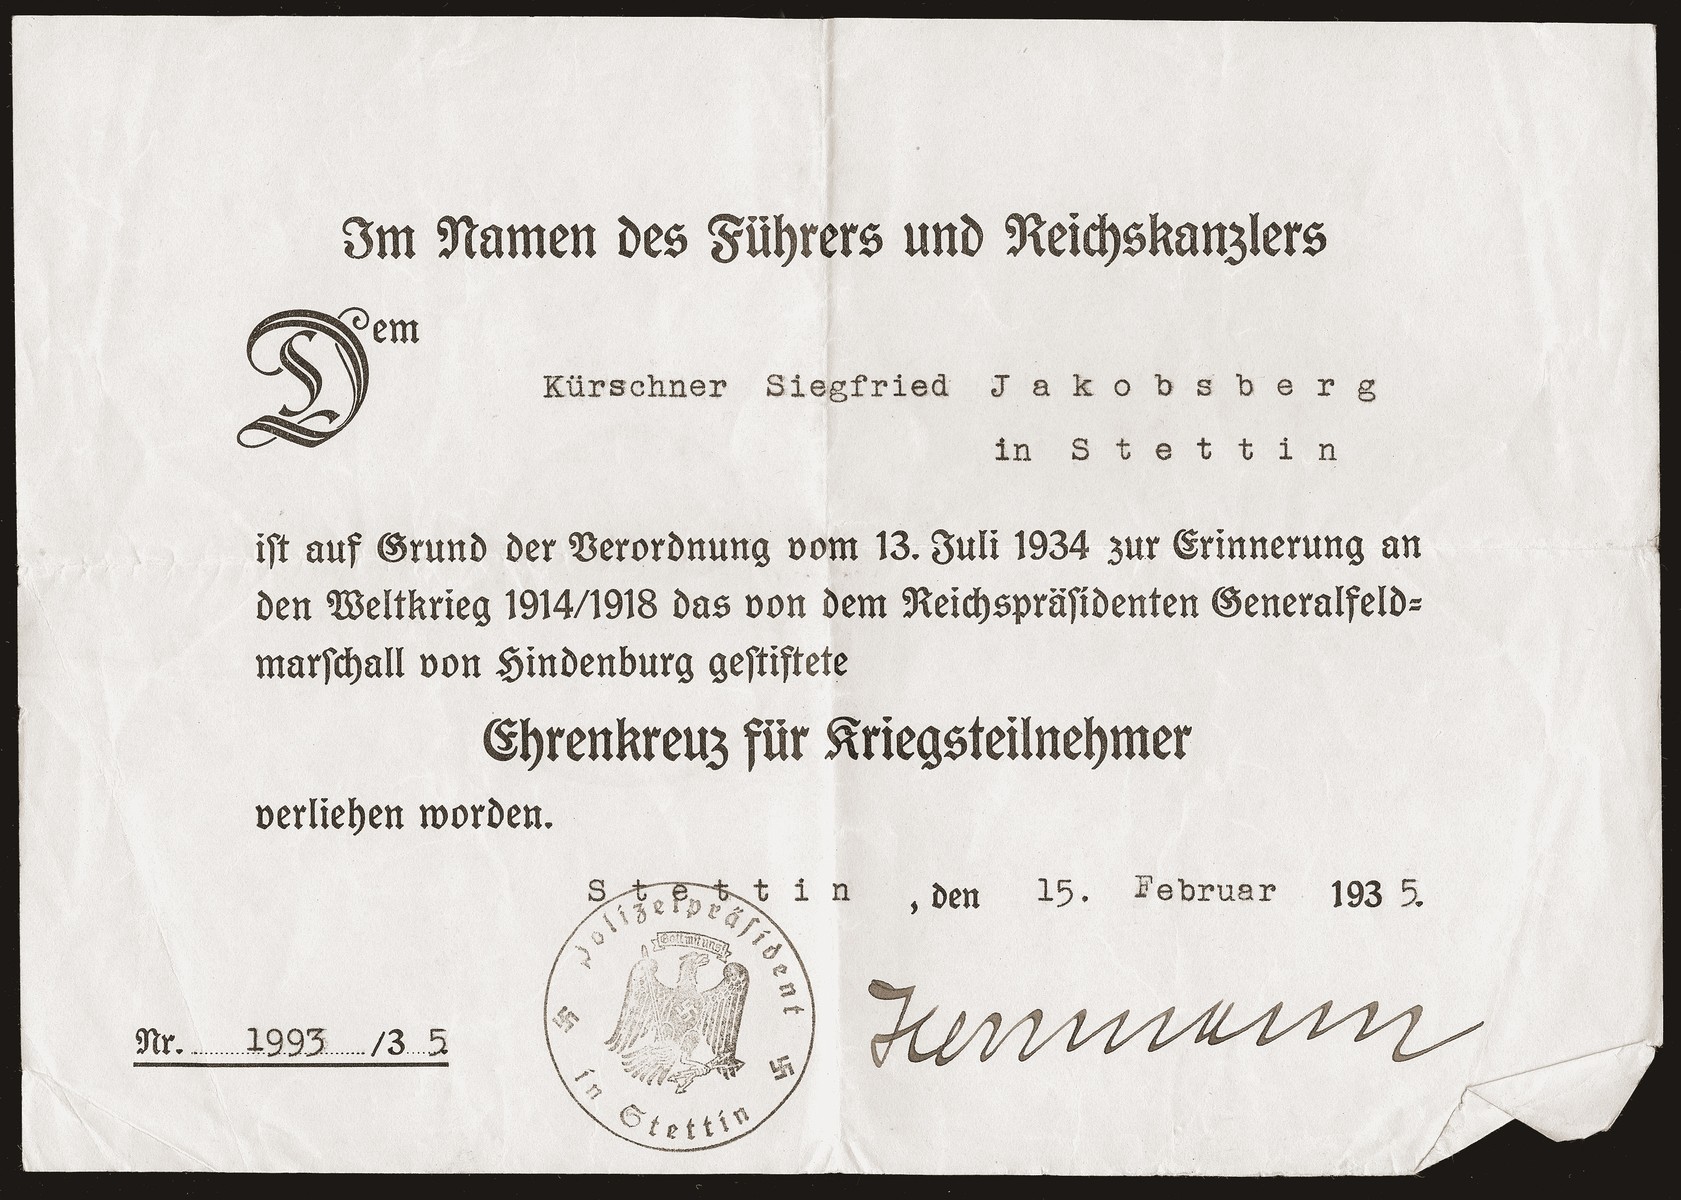 A certificate issued to Siegfried Jacobsberg recognizing him as a World War I veteran and recipient of a medal of honor.